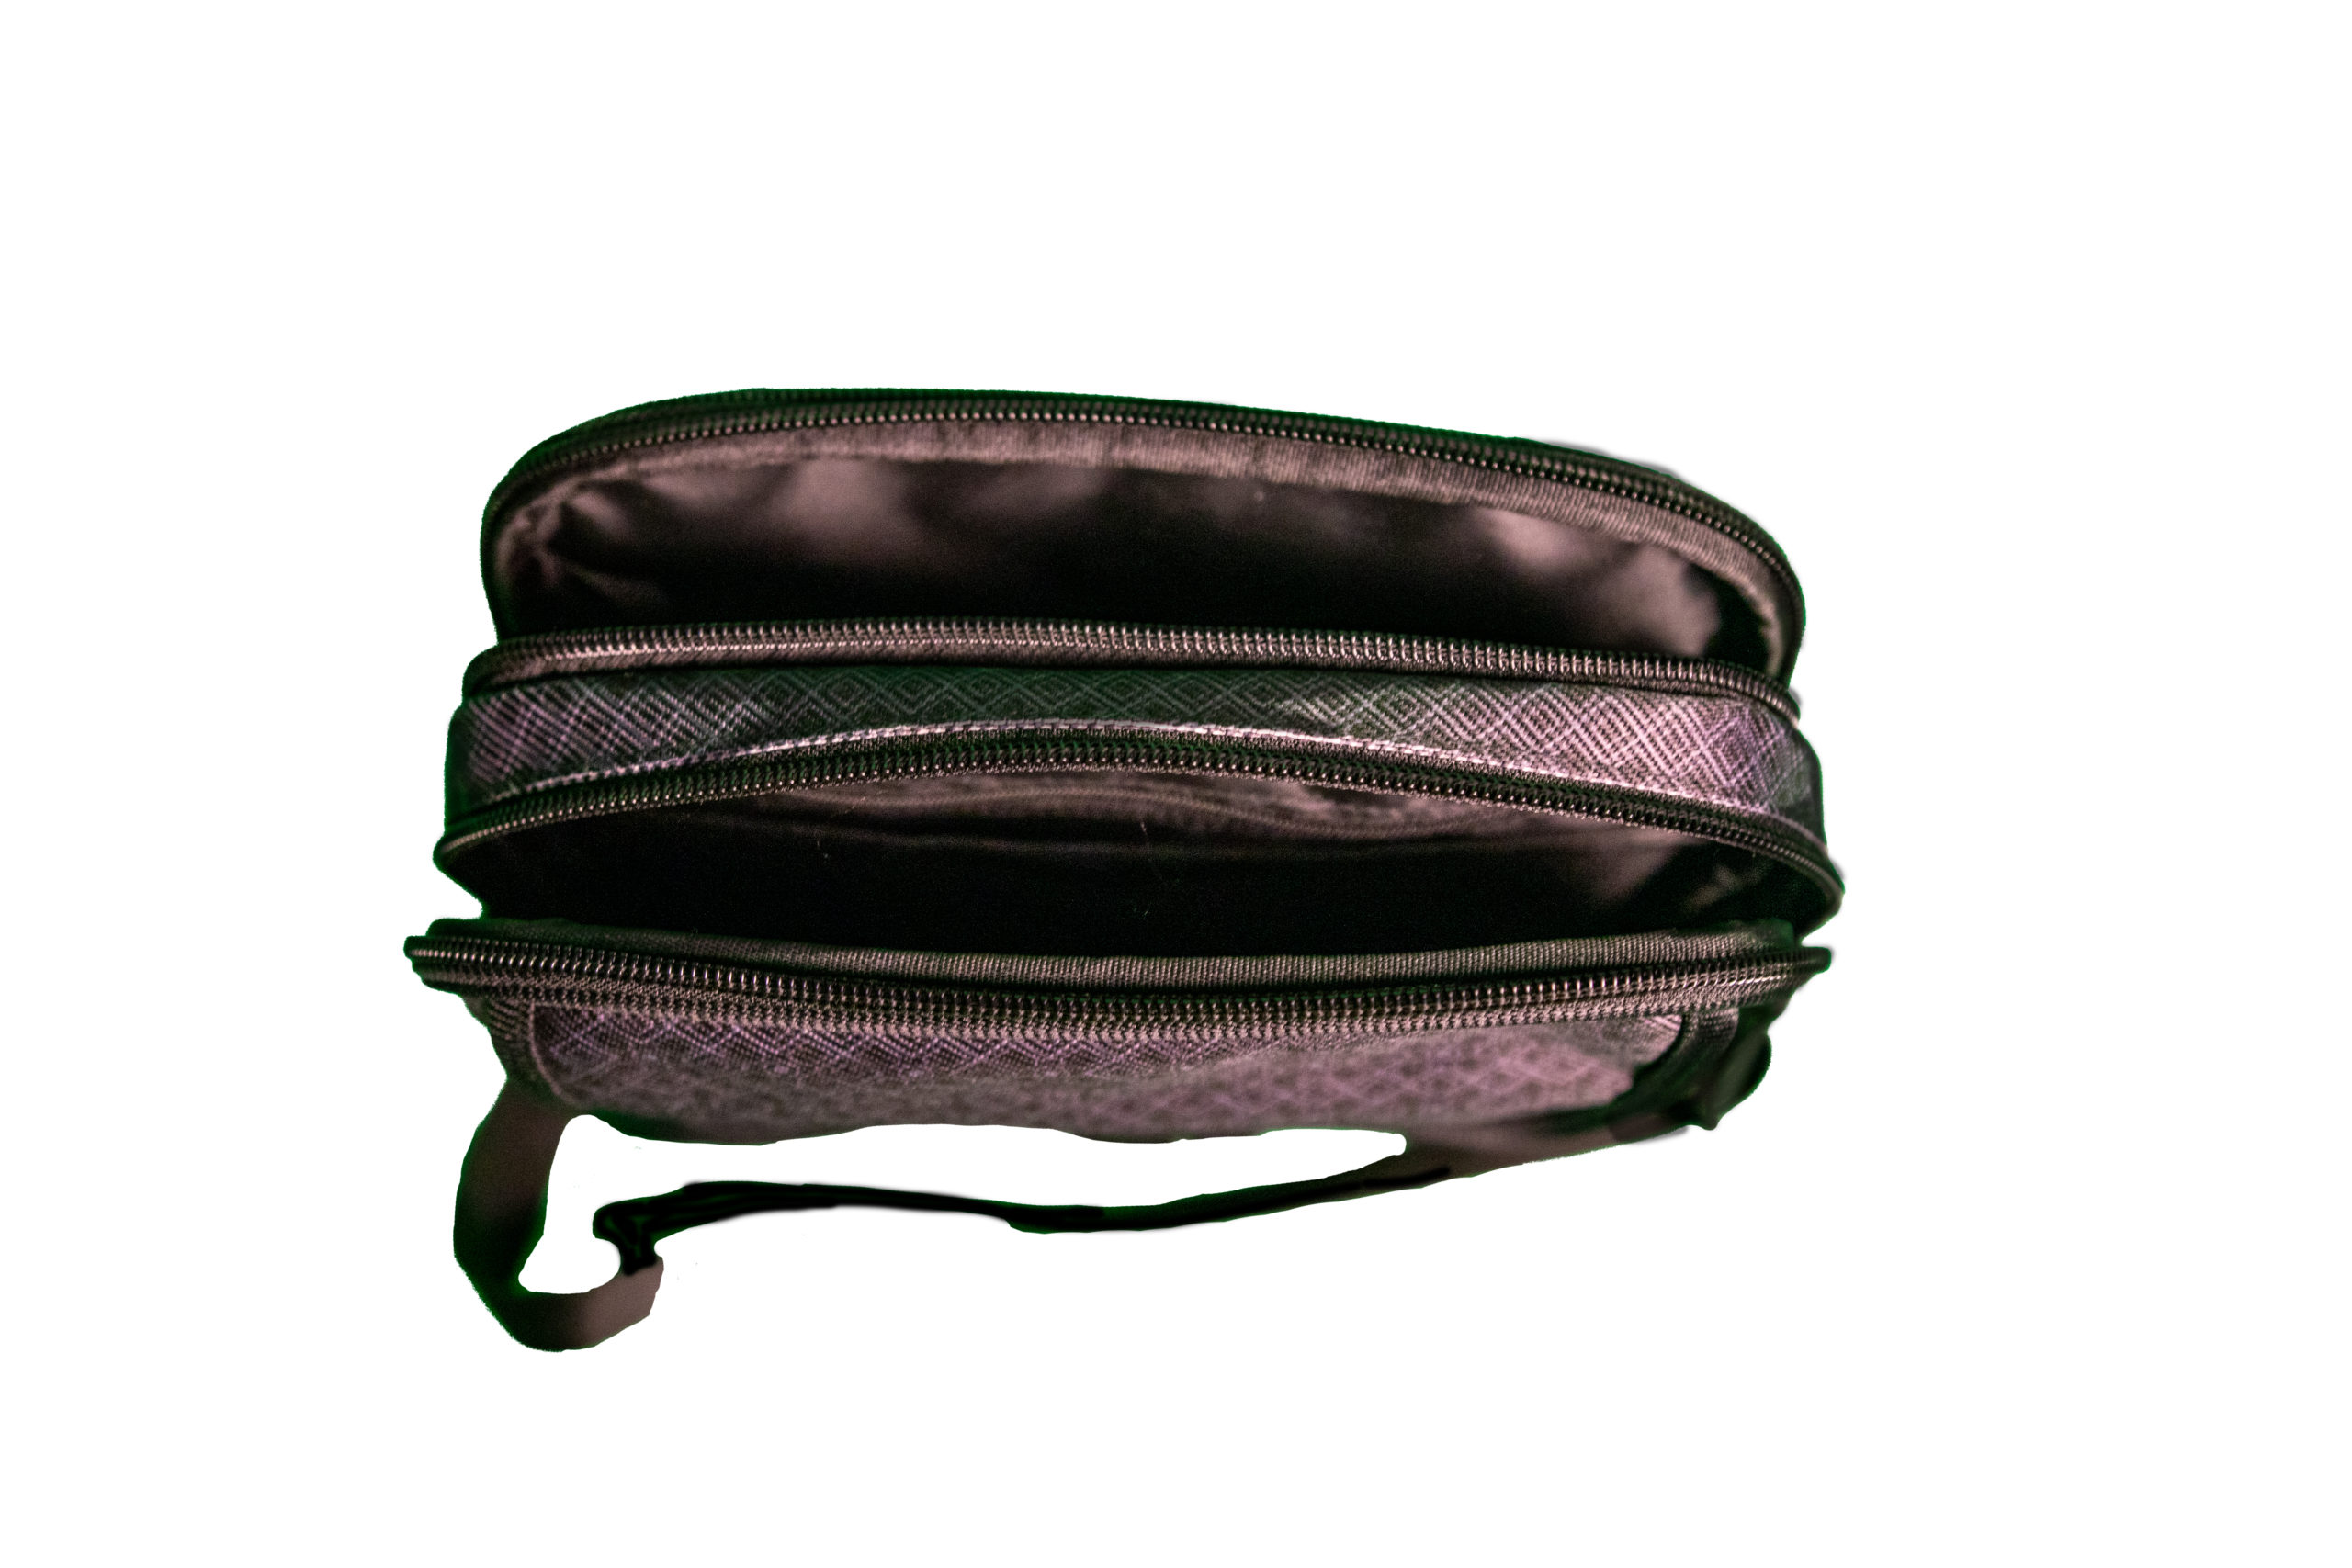 Rugged Purse - Bandit Outdoors